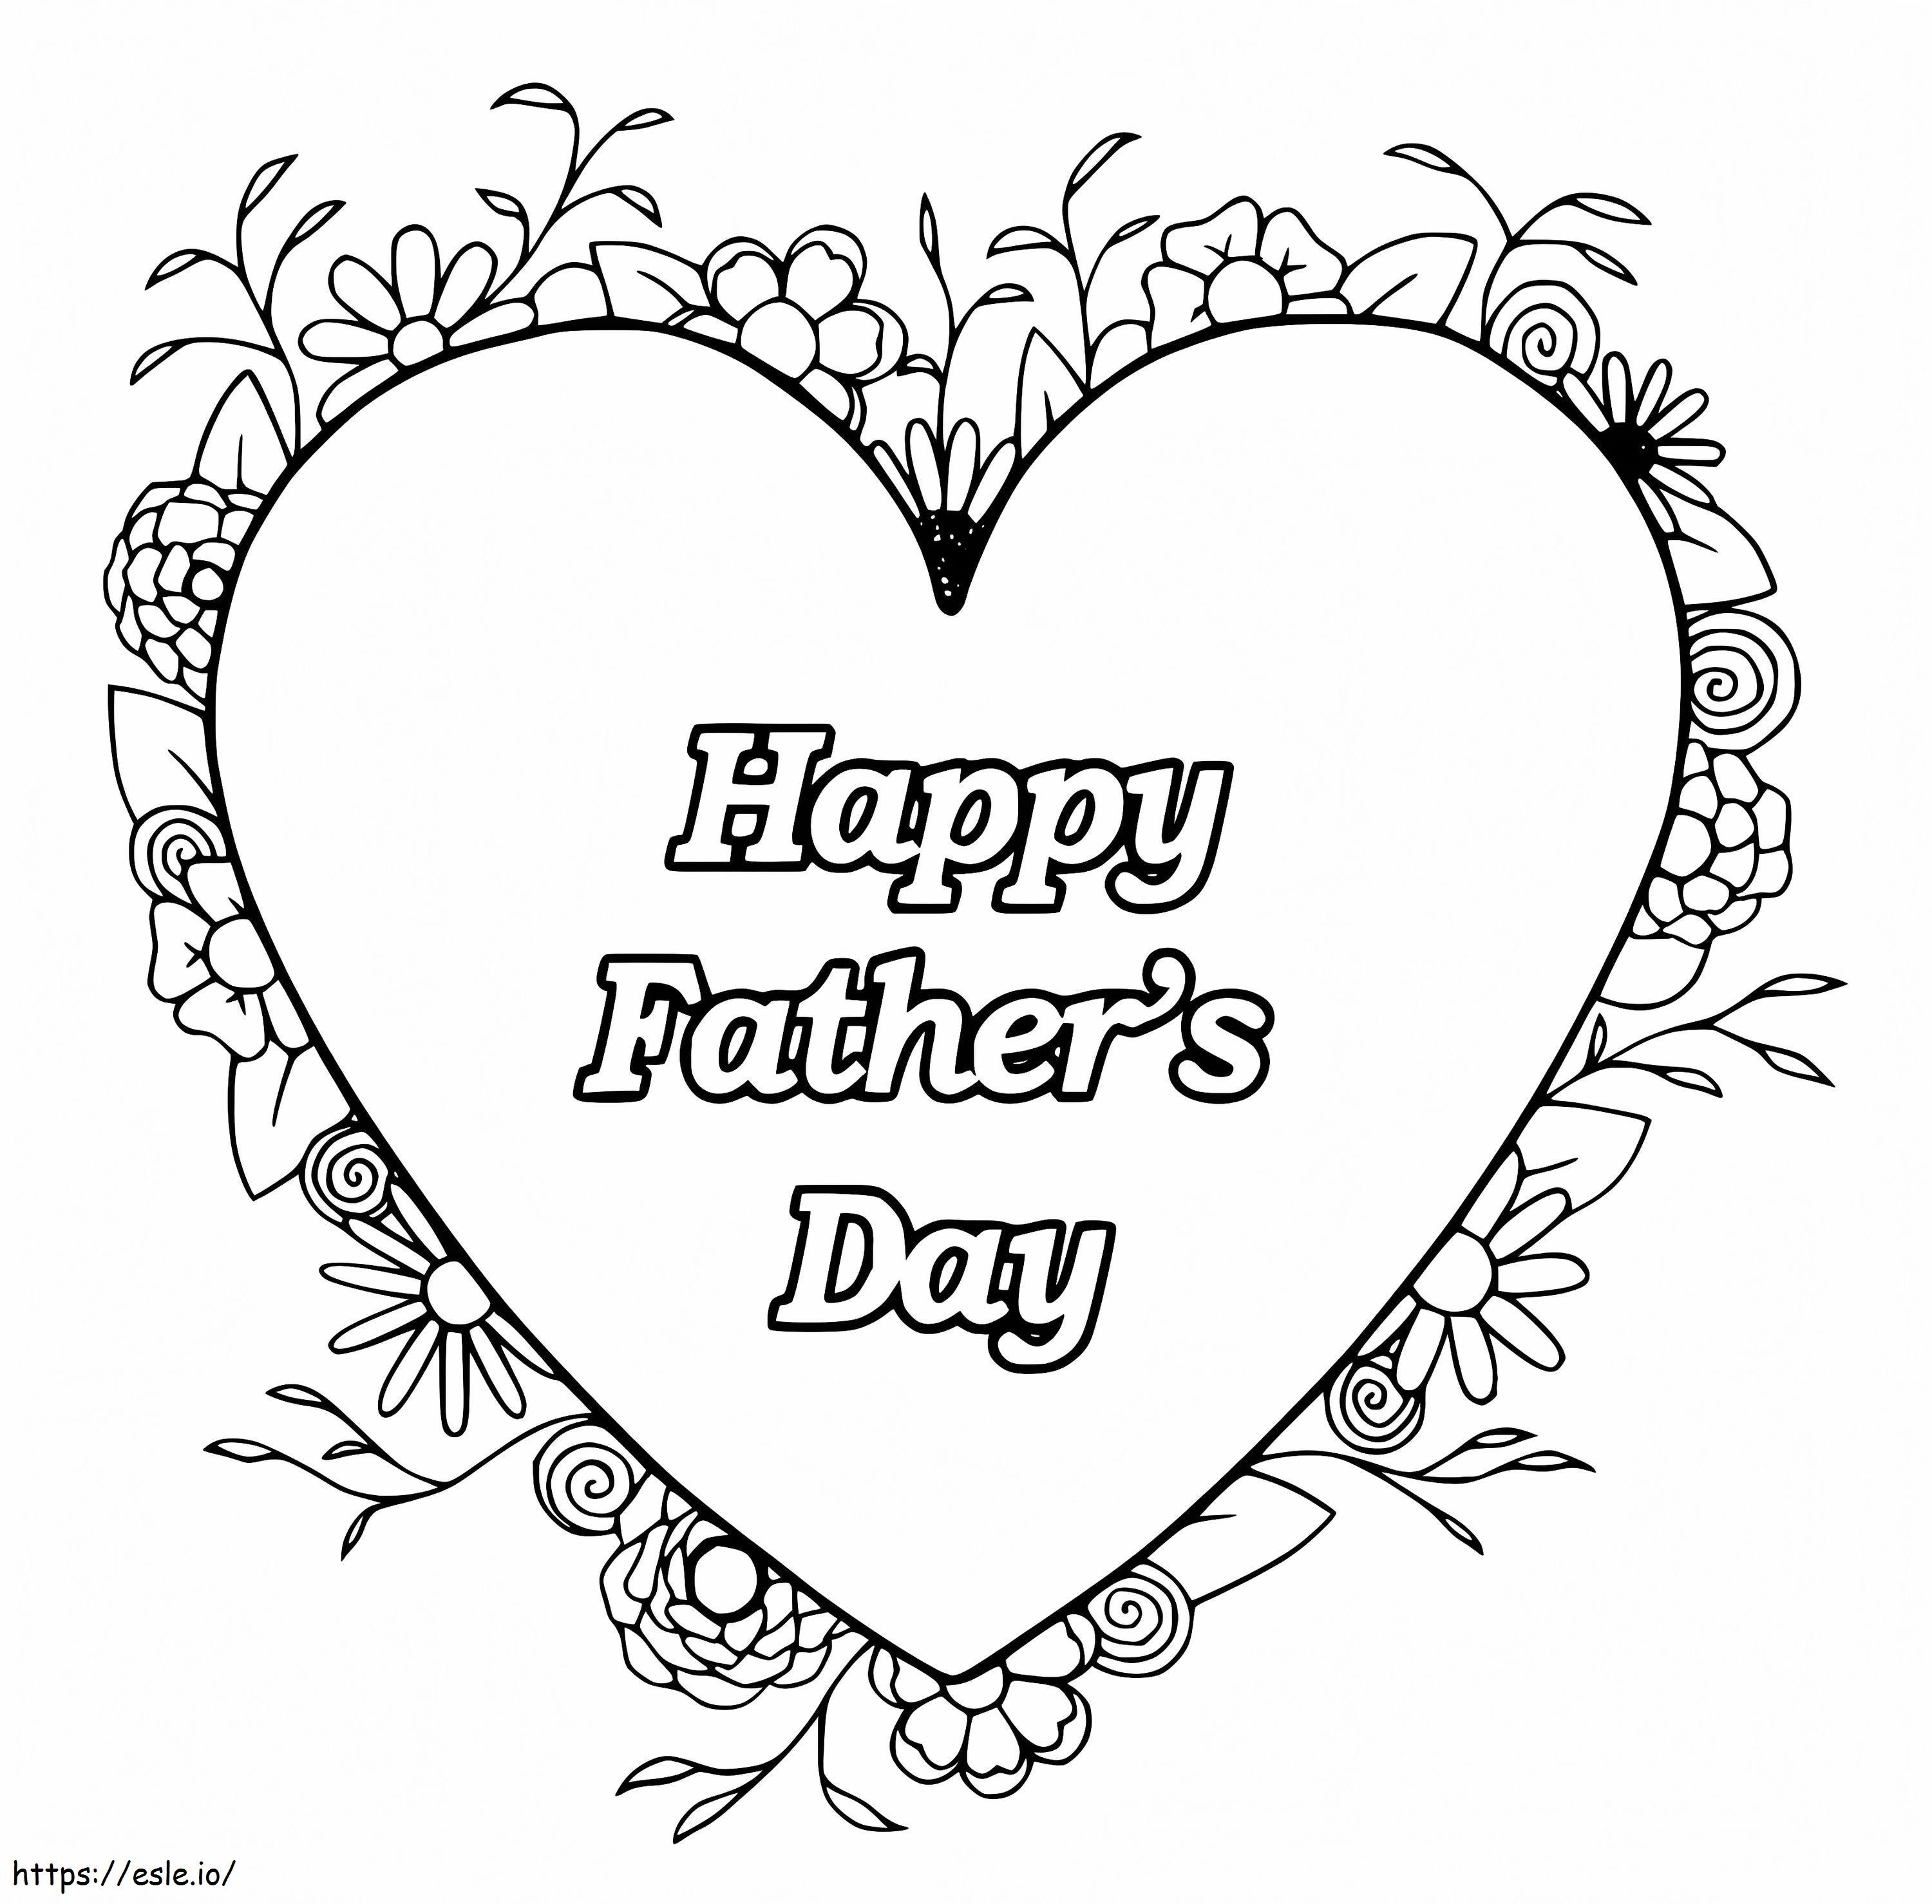 Happy Fathers Day 8 coloring page